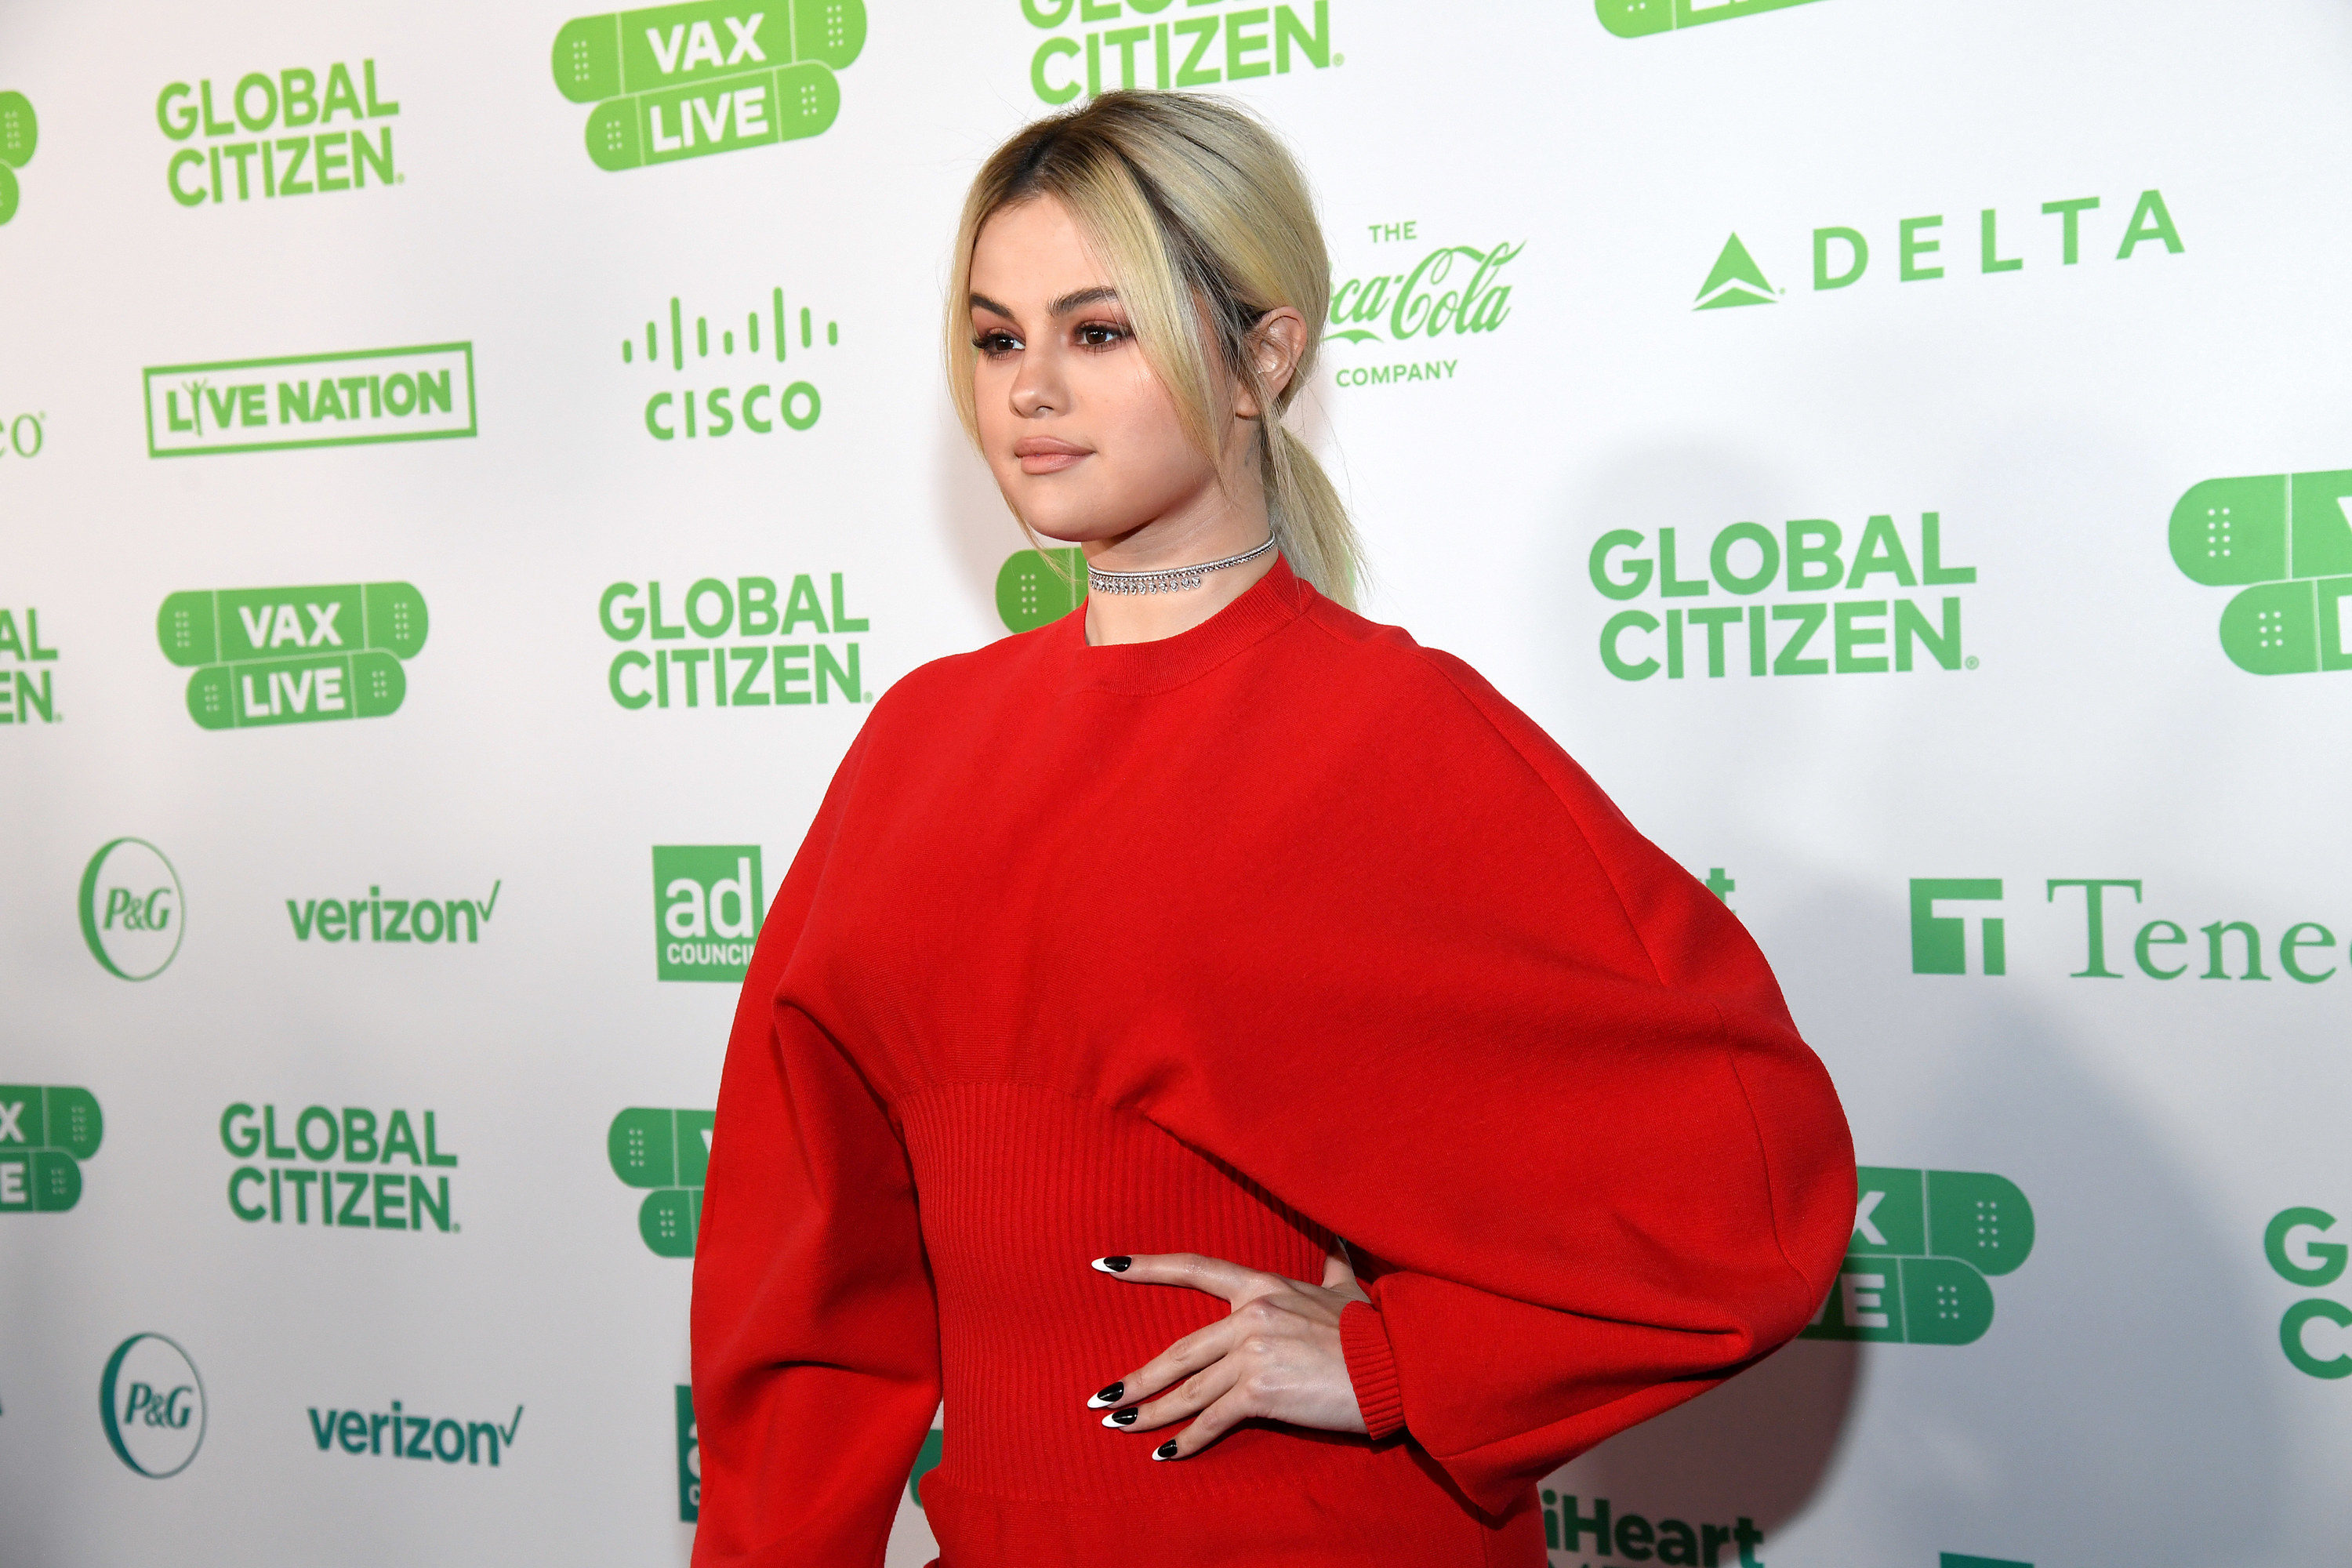 Selena Gomez attends the Global Citizen VAX LIVE: The Concert To Reunite The World at SoFi Stadium in Inglewood, California